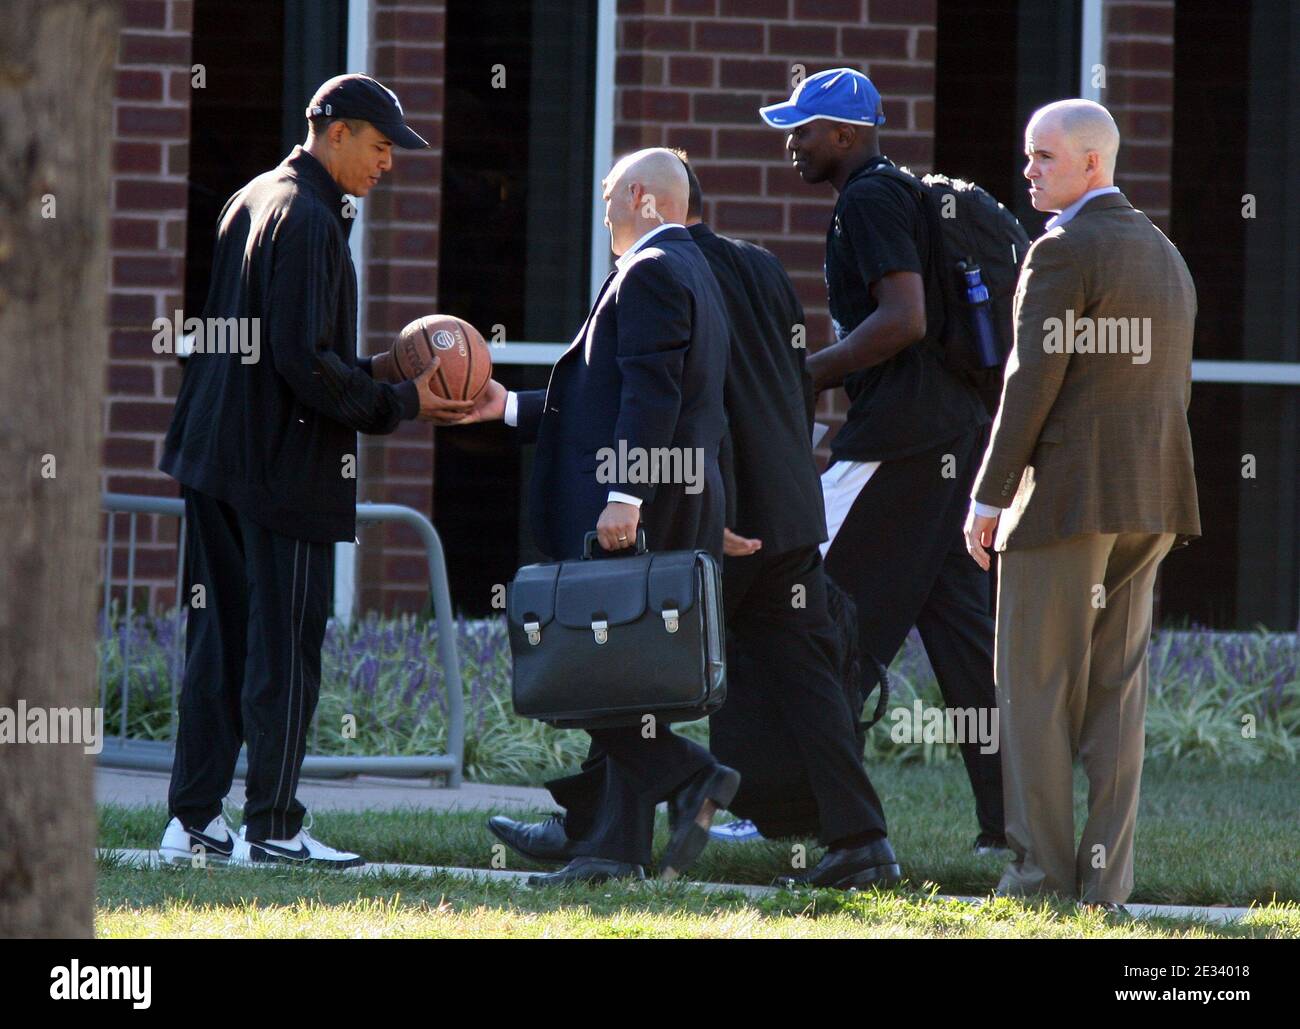 President Barack Obama is handed a basketball by a military aide as he arrives at Fort Leslie J. McNair's athletic facility for a morning game of basketball in Washington, DC, USA on September 18, 2010. Also shown are Reggie Love, the president's personal aide (blue cap), and other unidentified aides. Photo by Martin H. Simon/ABACAPRESS.COM (Pictured: Barack Obama, Reggie Love) Stock Photo